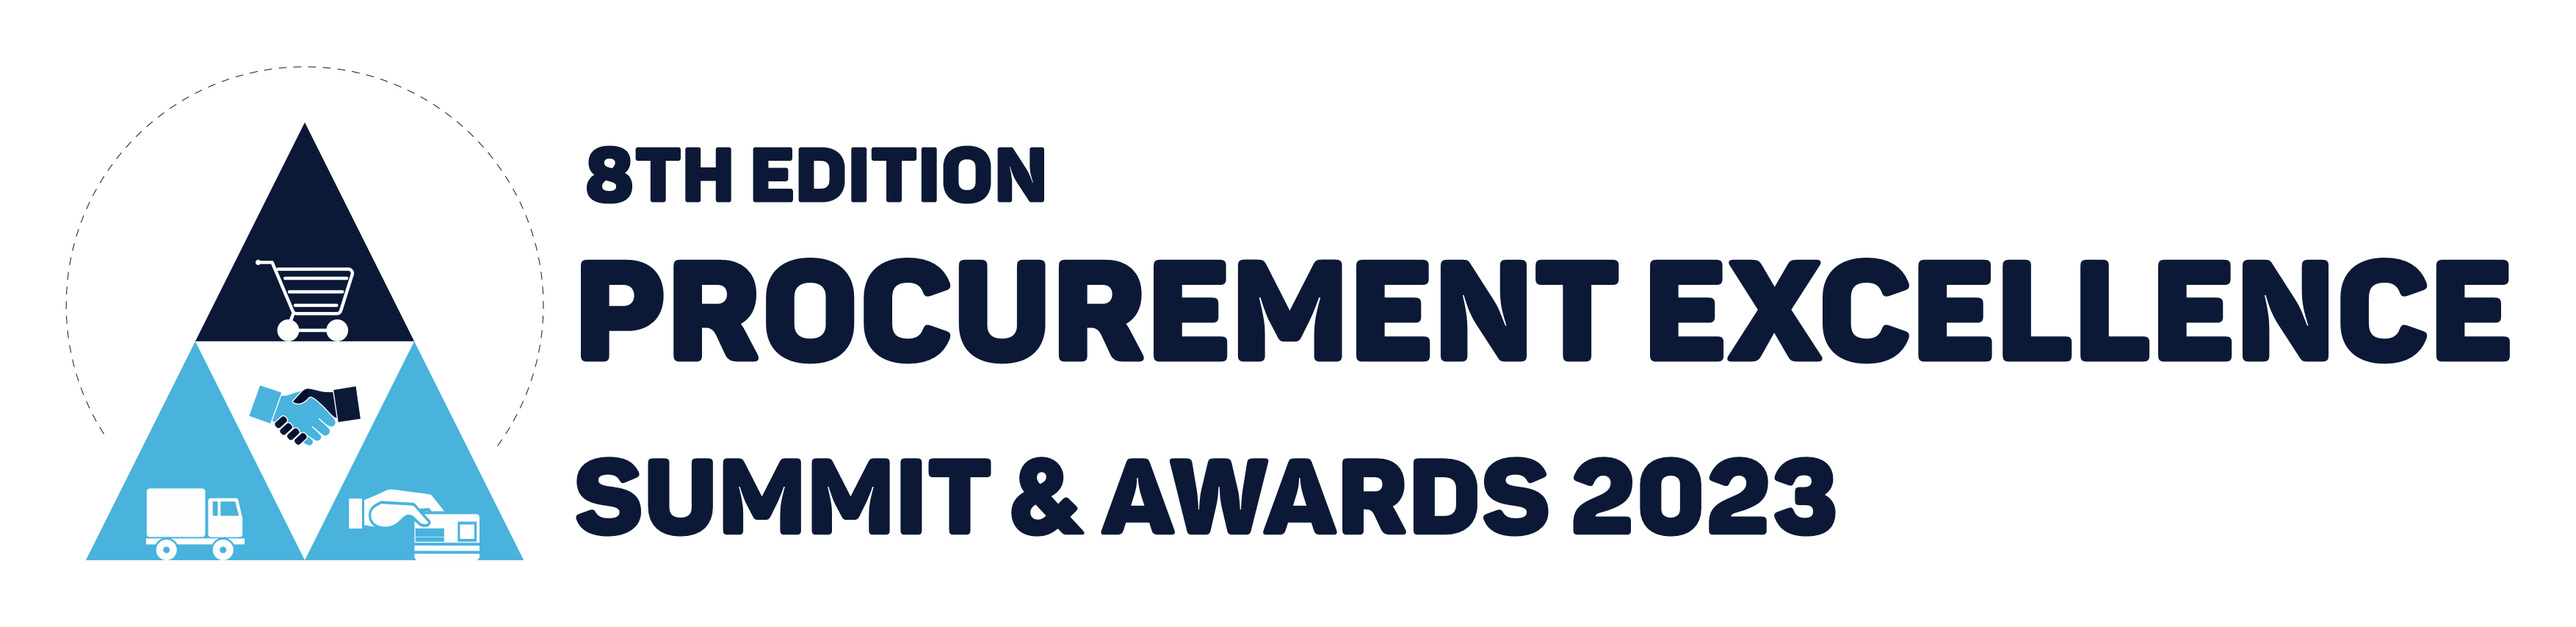 8th Edition Procurement Excellence Summit and Awards 2023